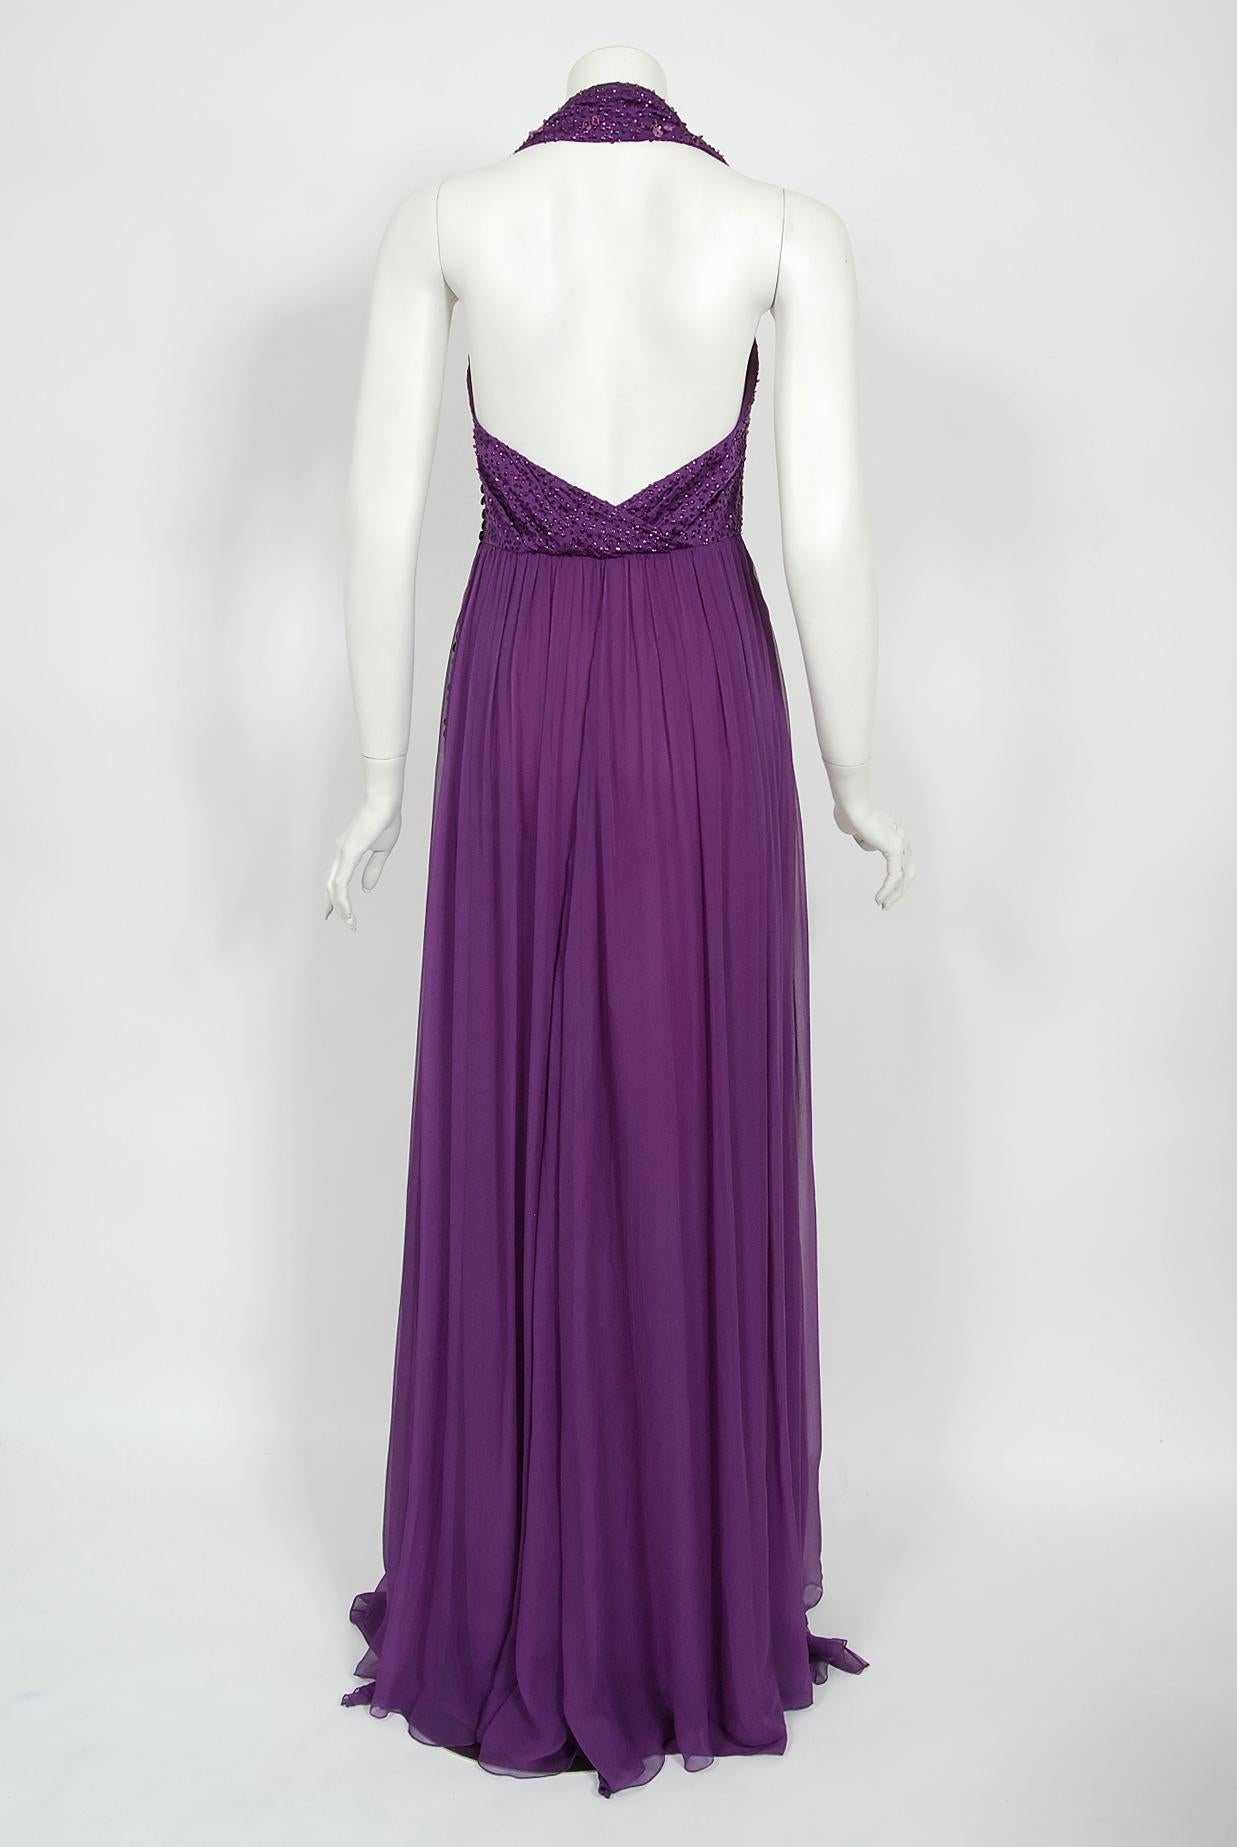 Vintage 2009 Christian Dior by Galliano Beaded Purple Silk Halter Backless Gown 7